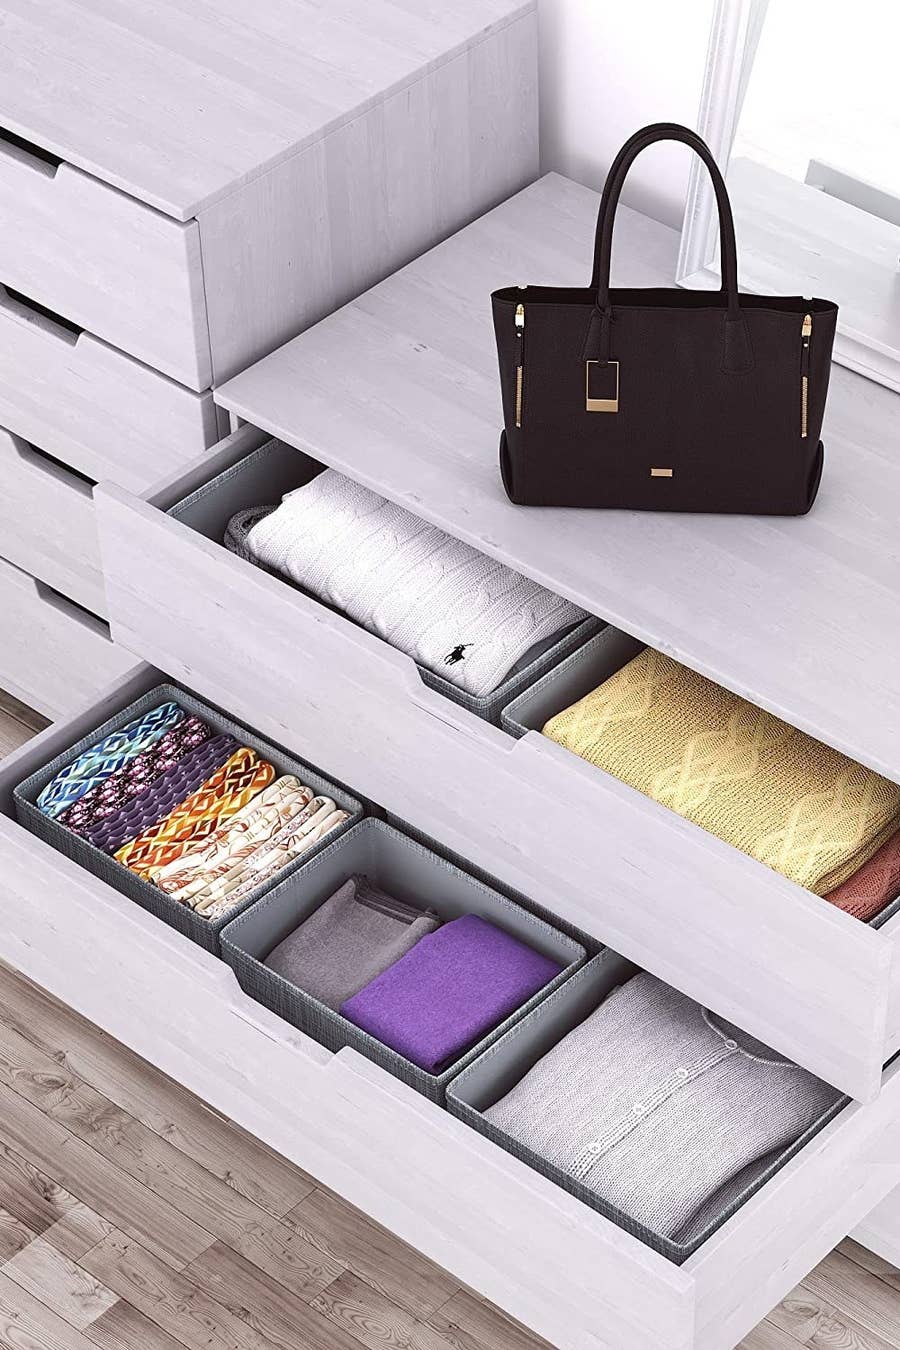 Update your partners underwear drawer with a pack of luxurious